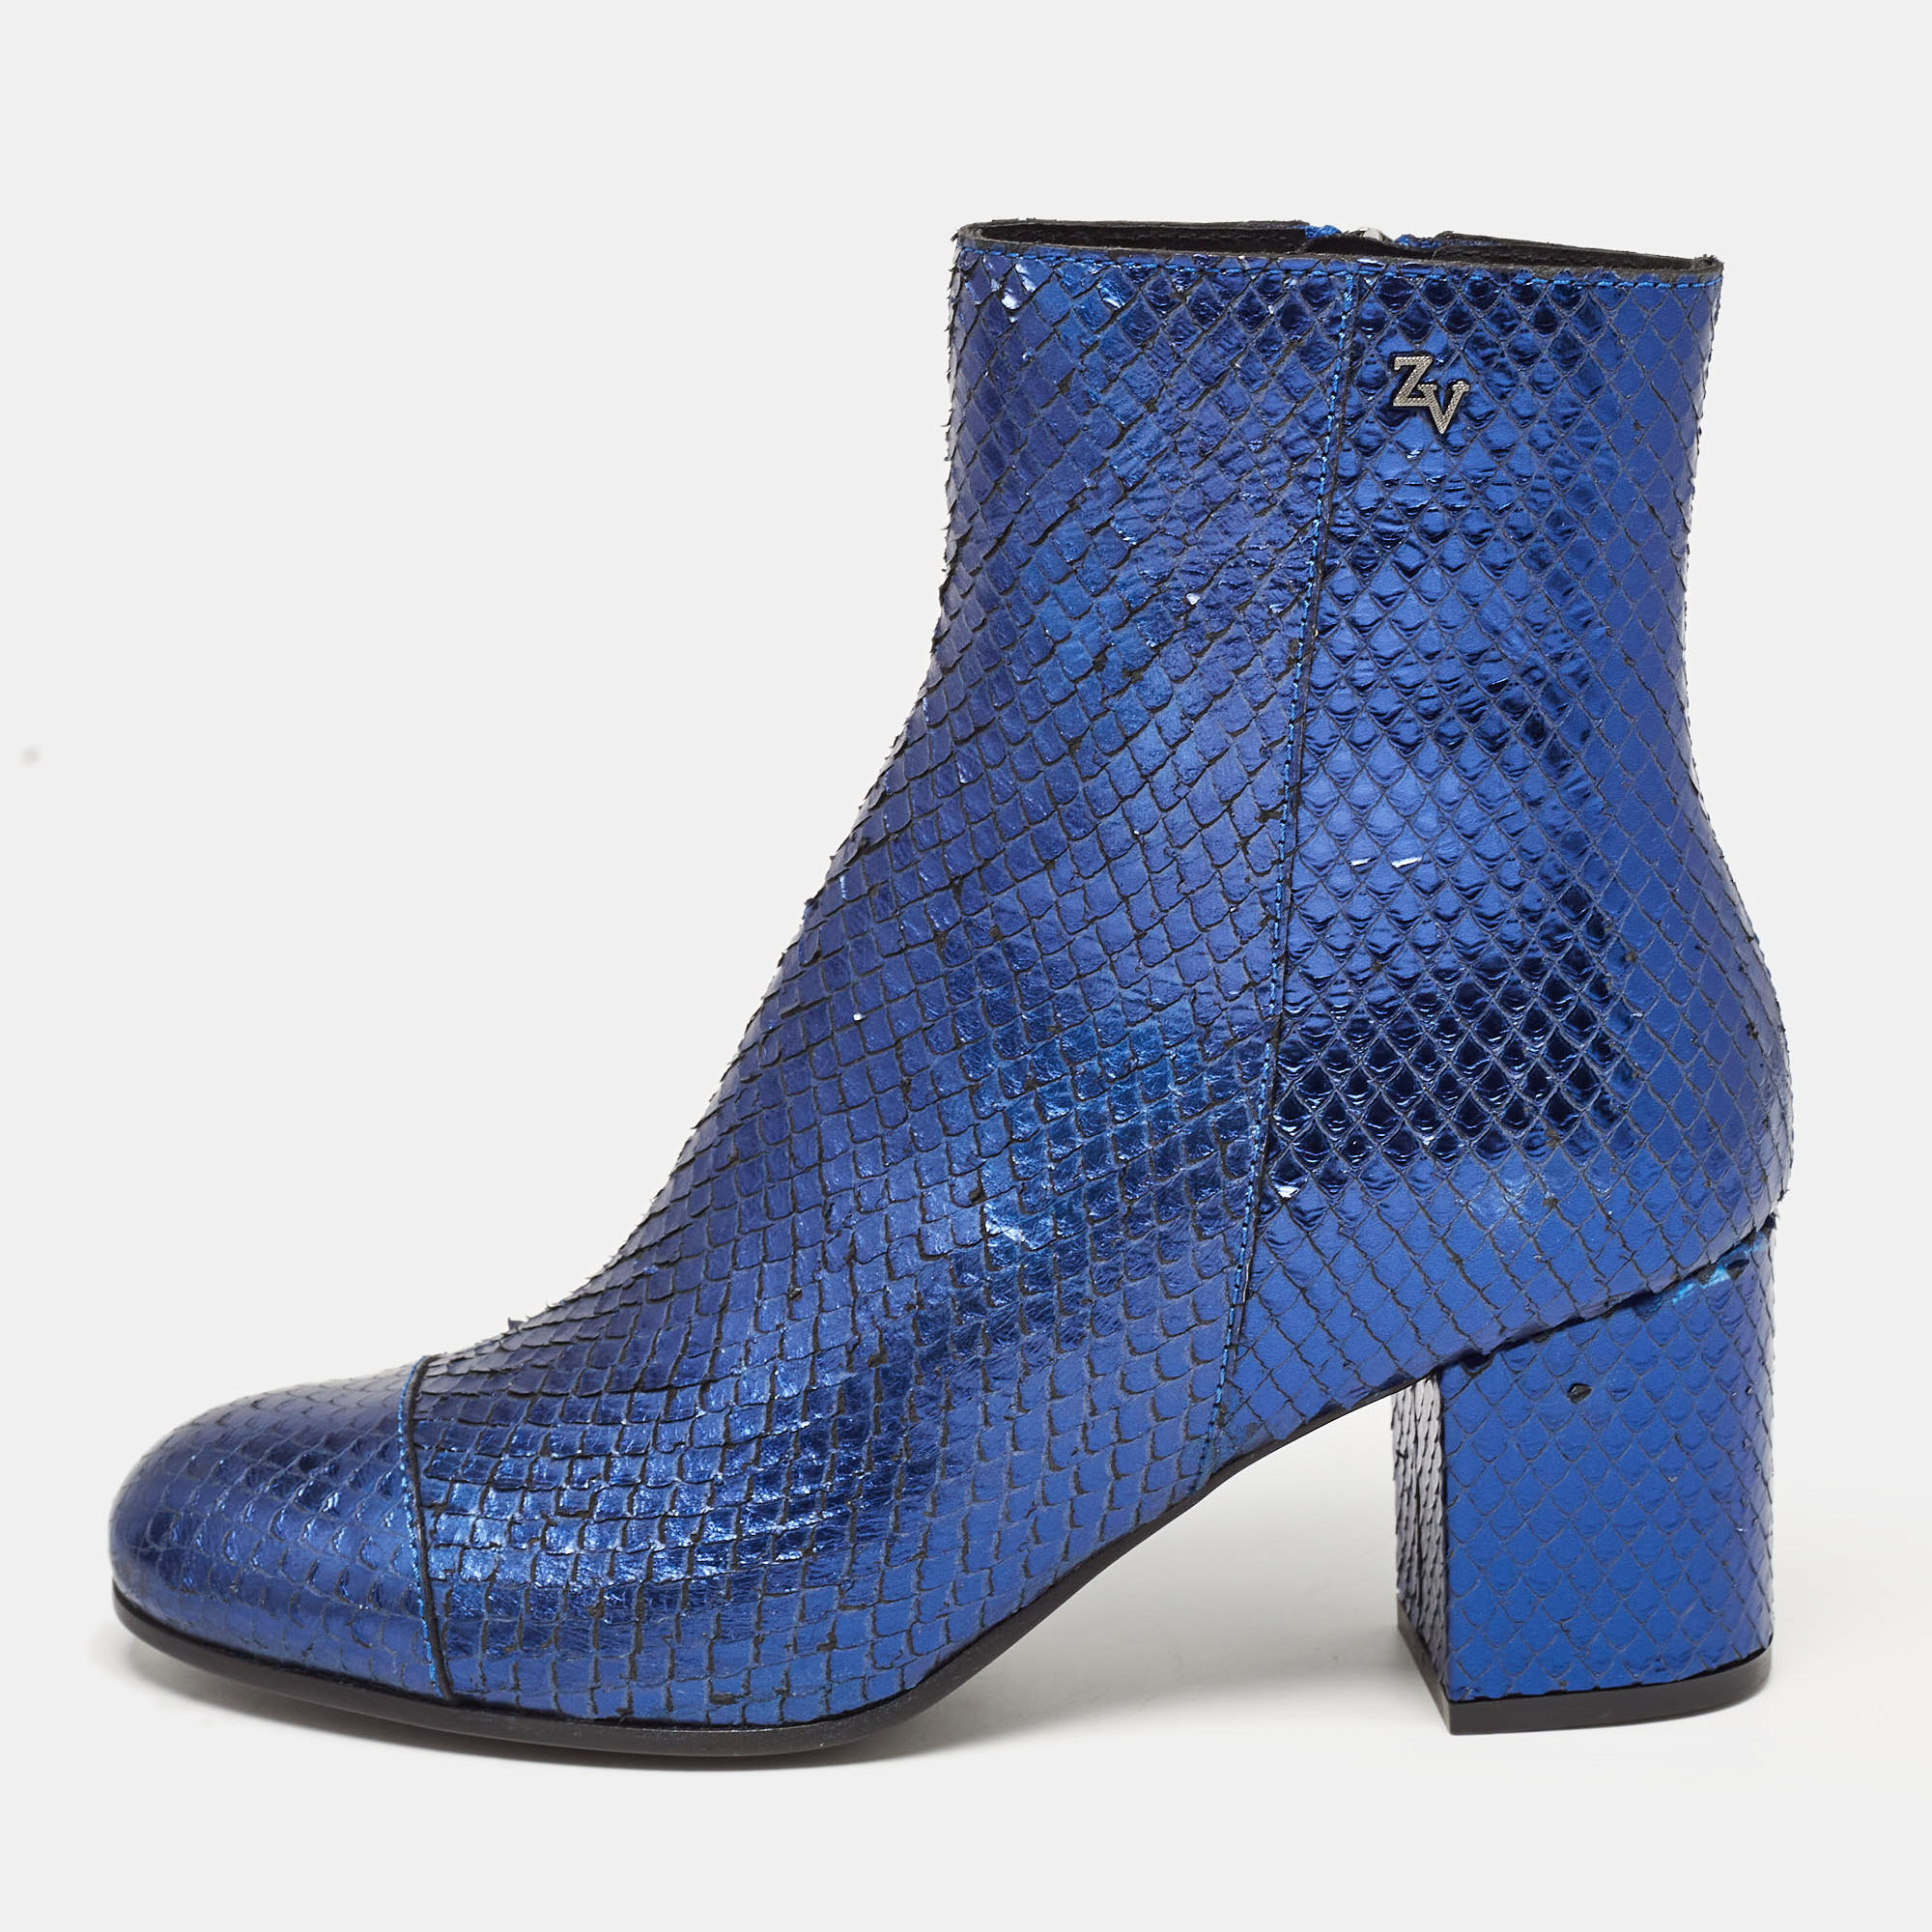 Zadig & voltaire metallic blue snakeskin embossed leather zip ankle boots size 36